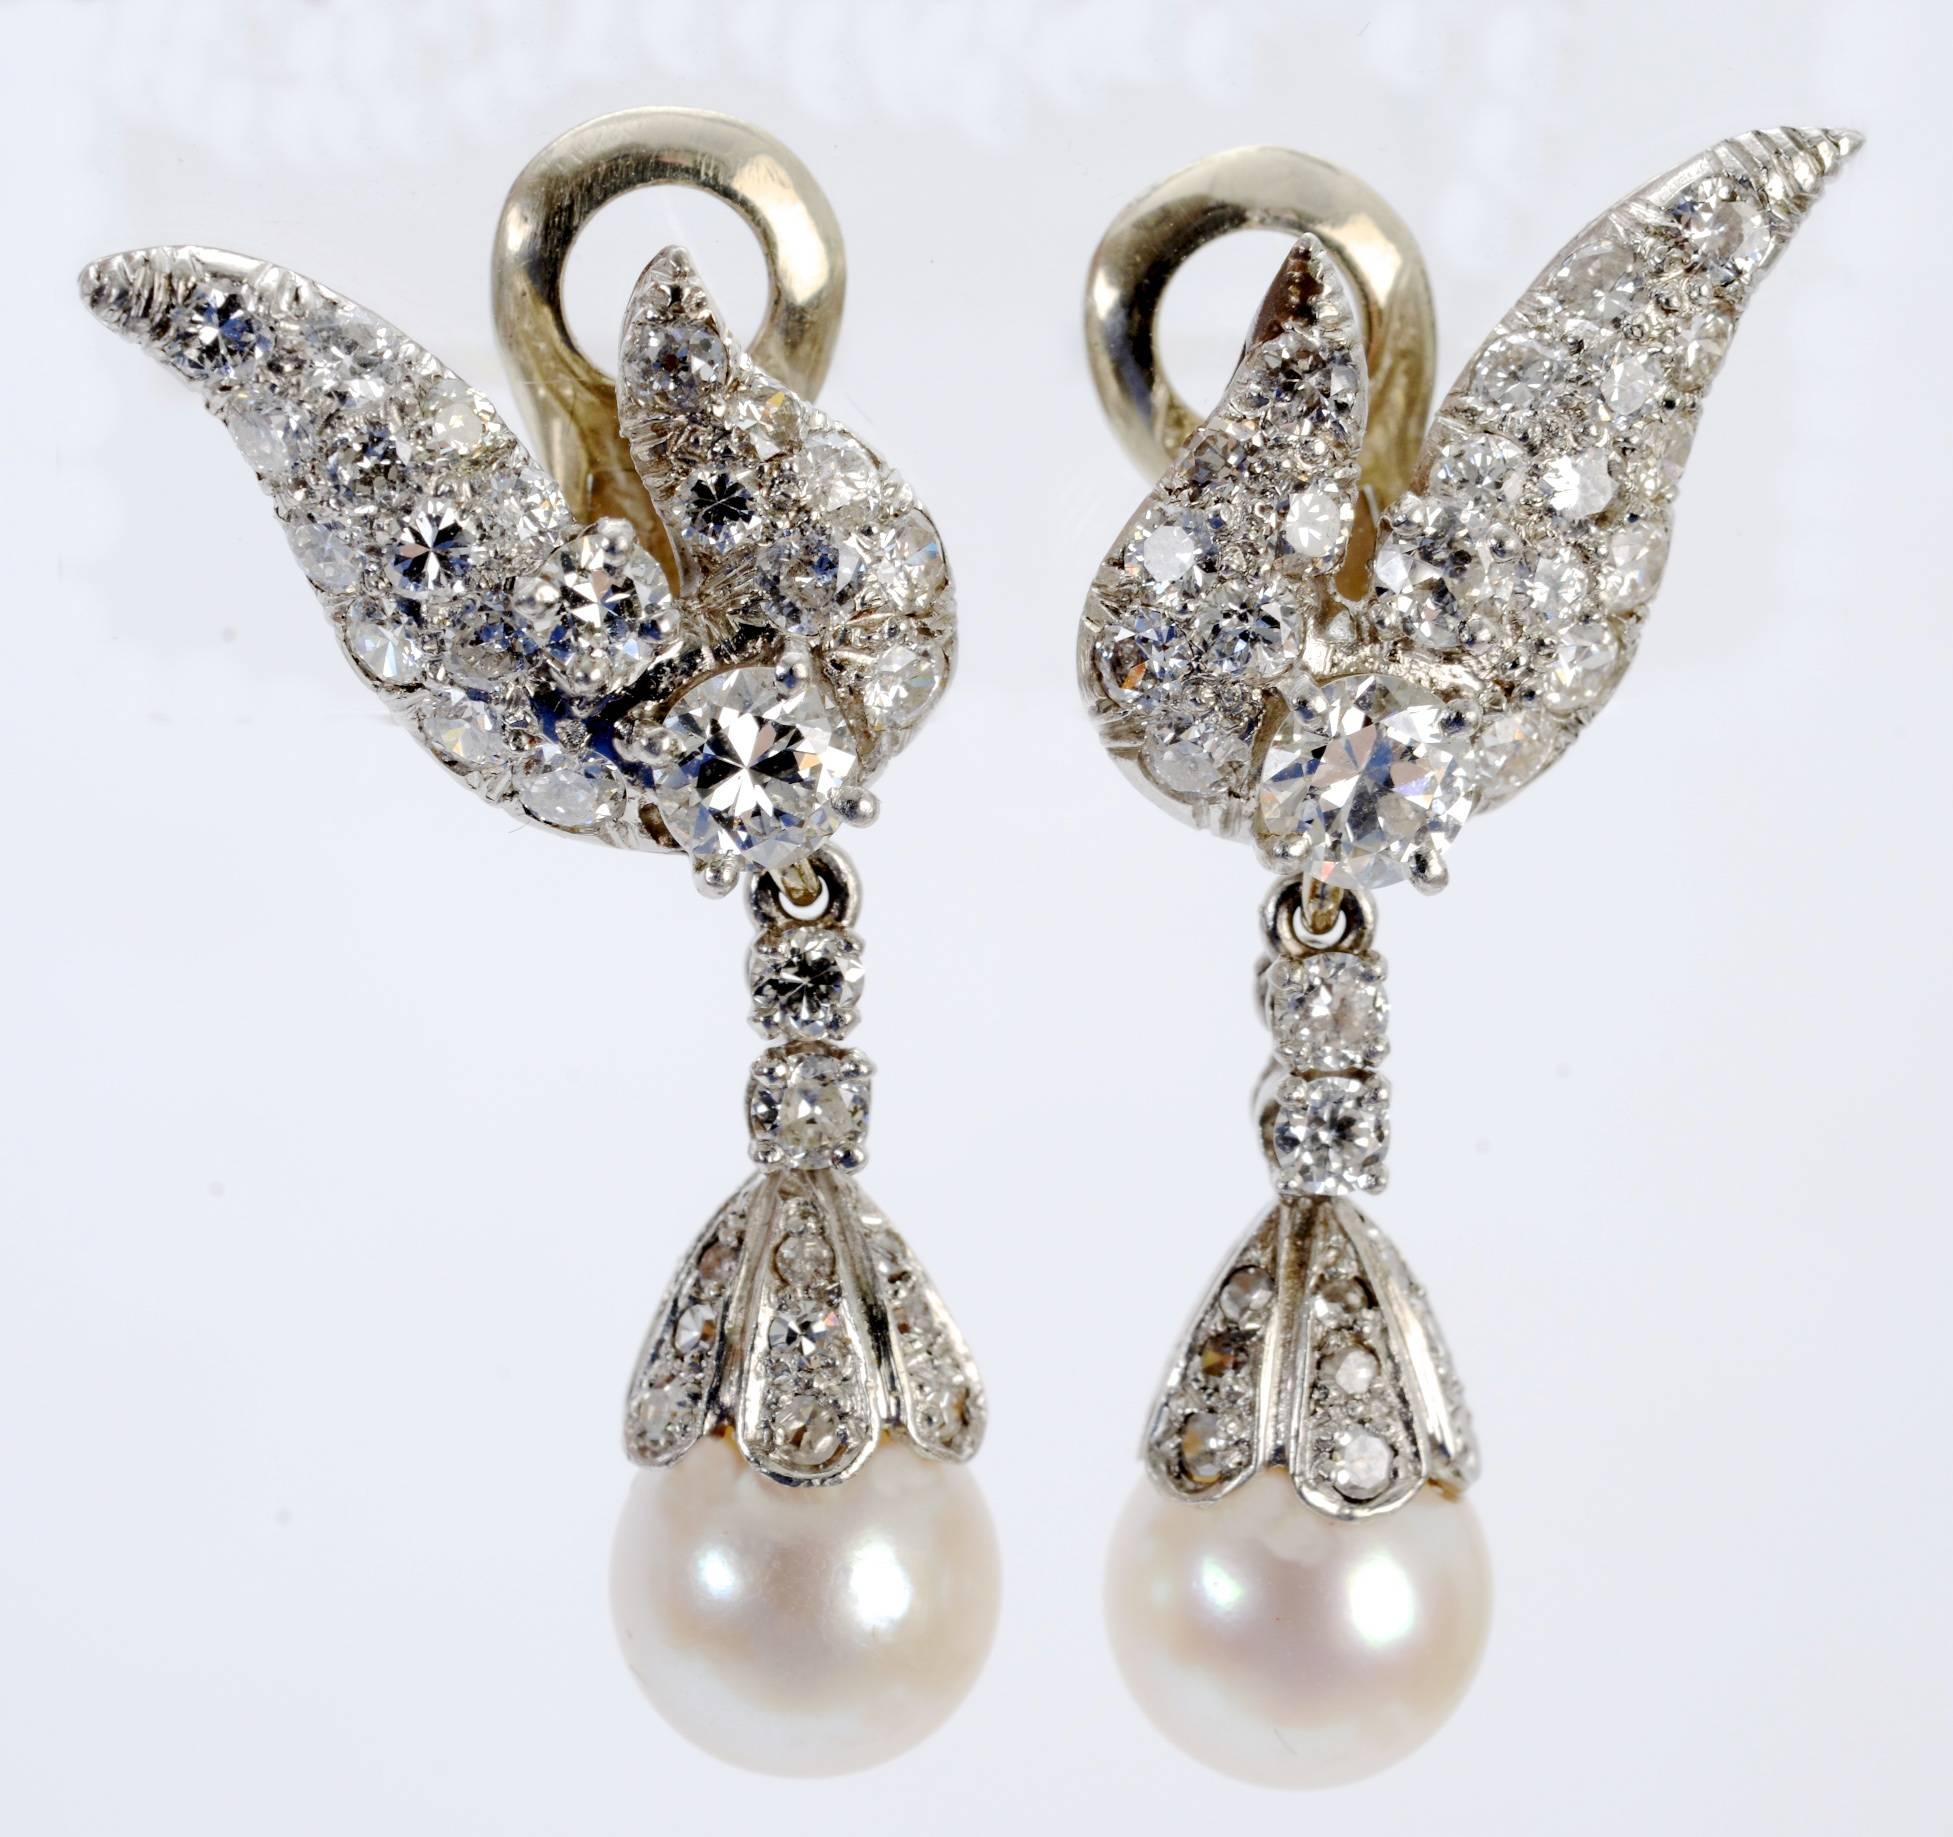 Round Cut Diamond Earrings with Detachable Pearl and Diamond Drops by Charles Vaillant